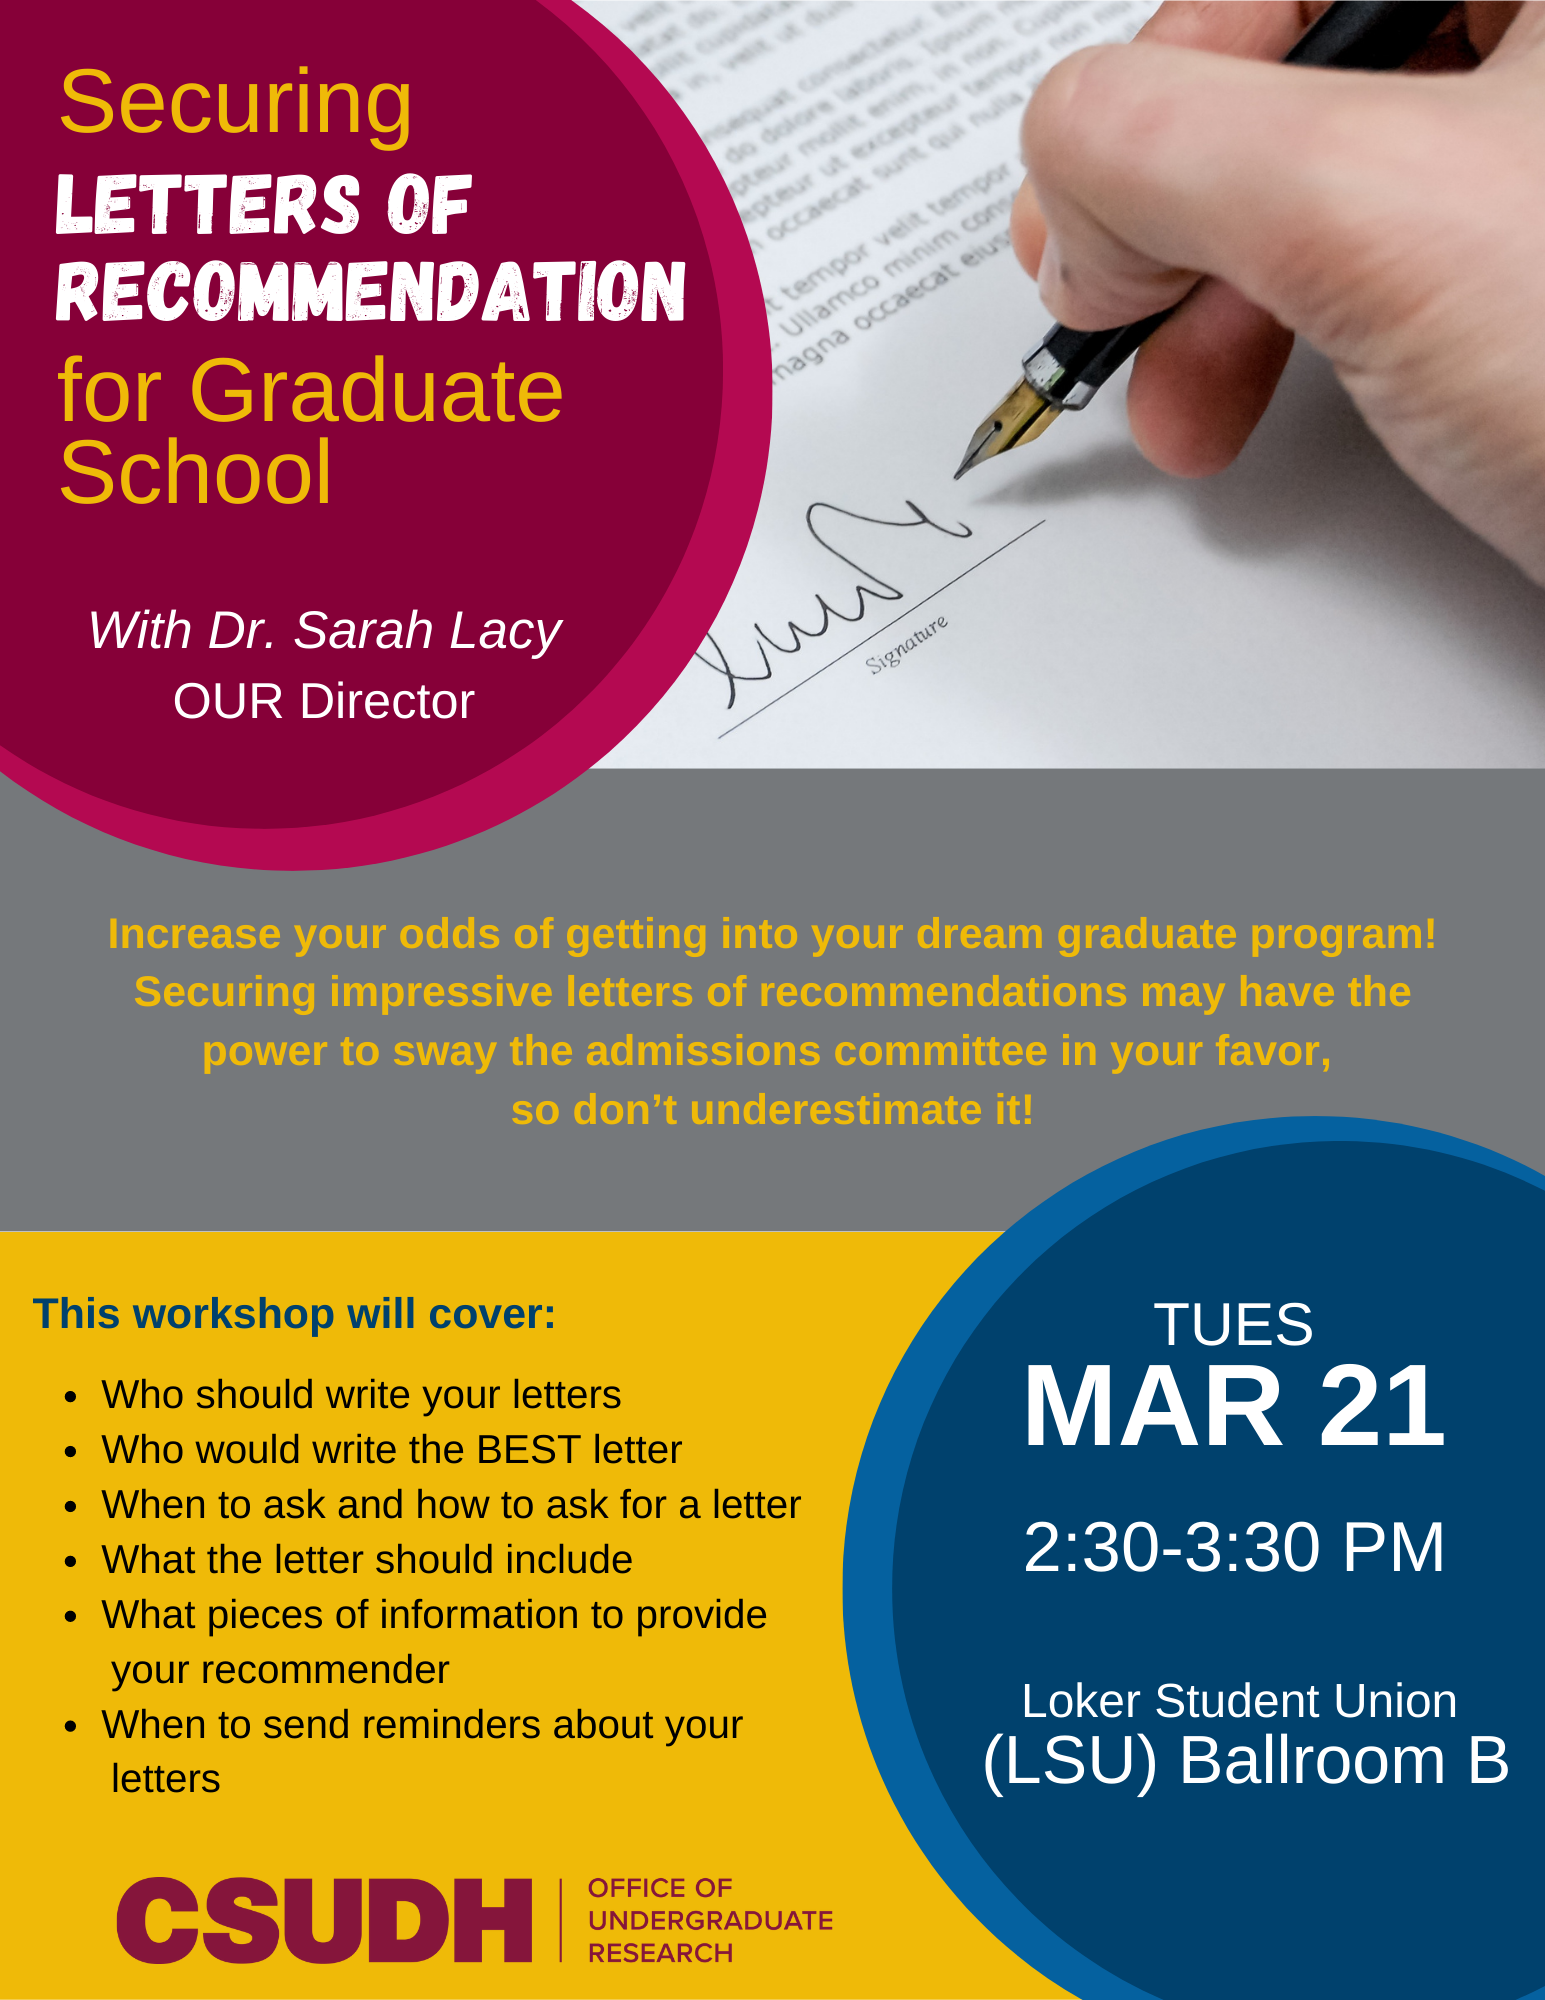 Securing-Letters-of-Recommendation-for-Graduate-School-Flyer-3-21-23